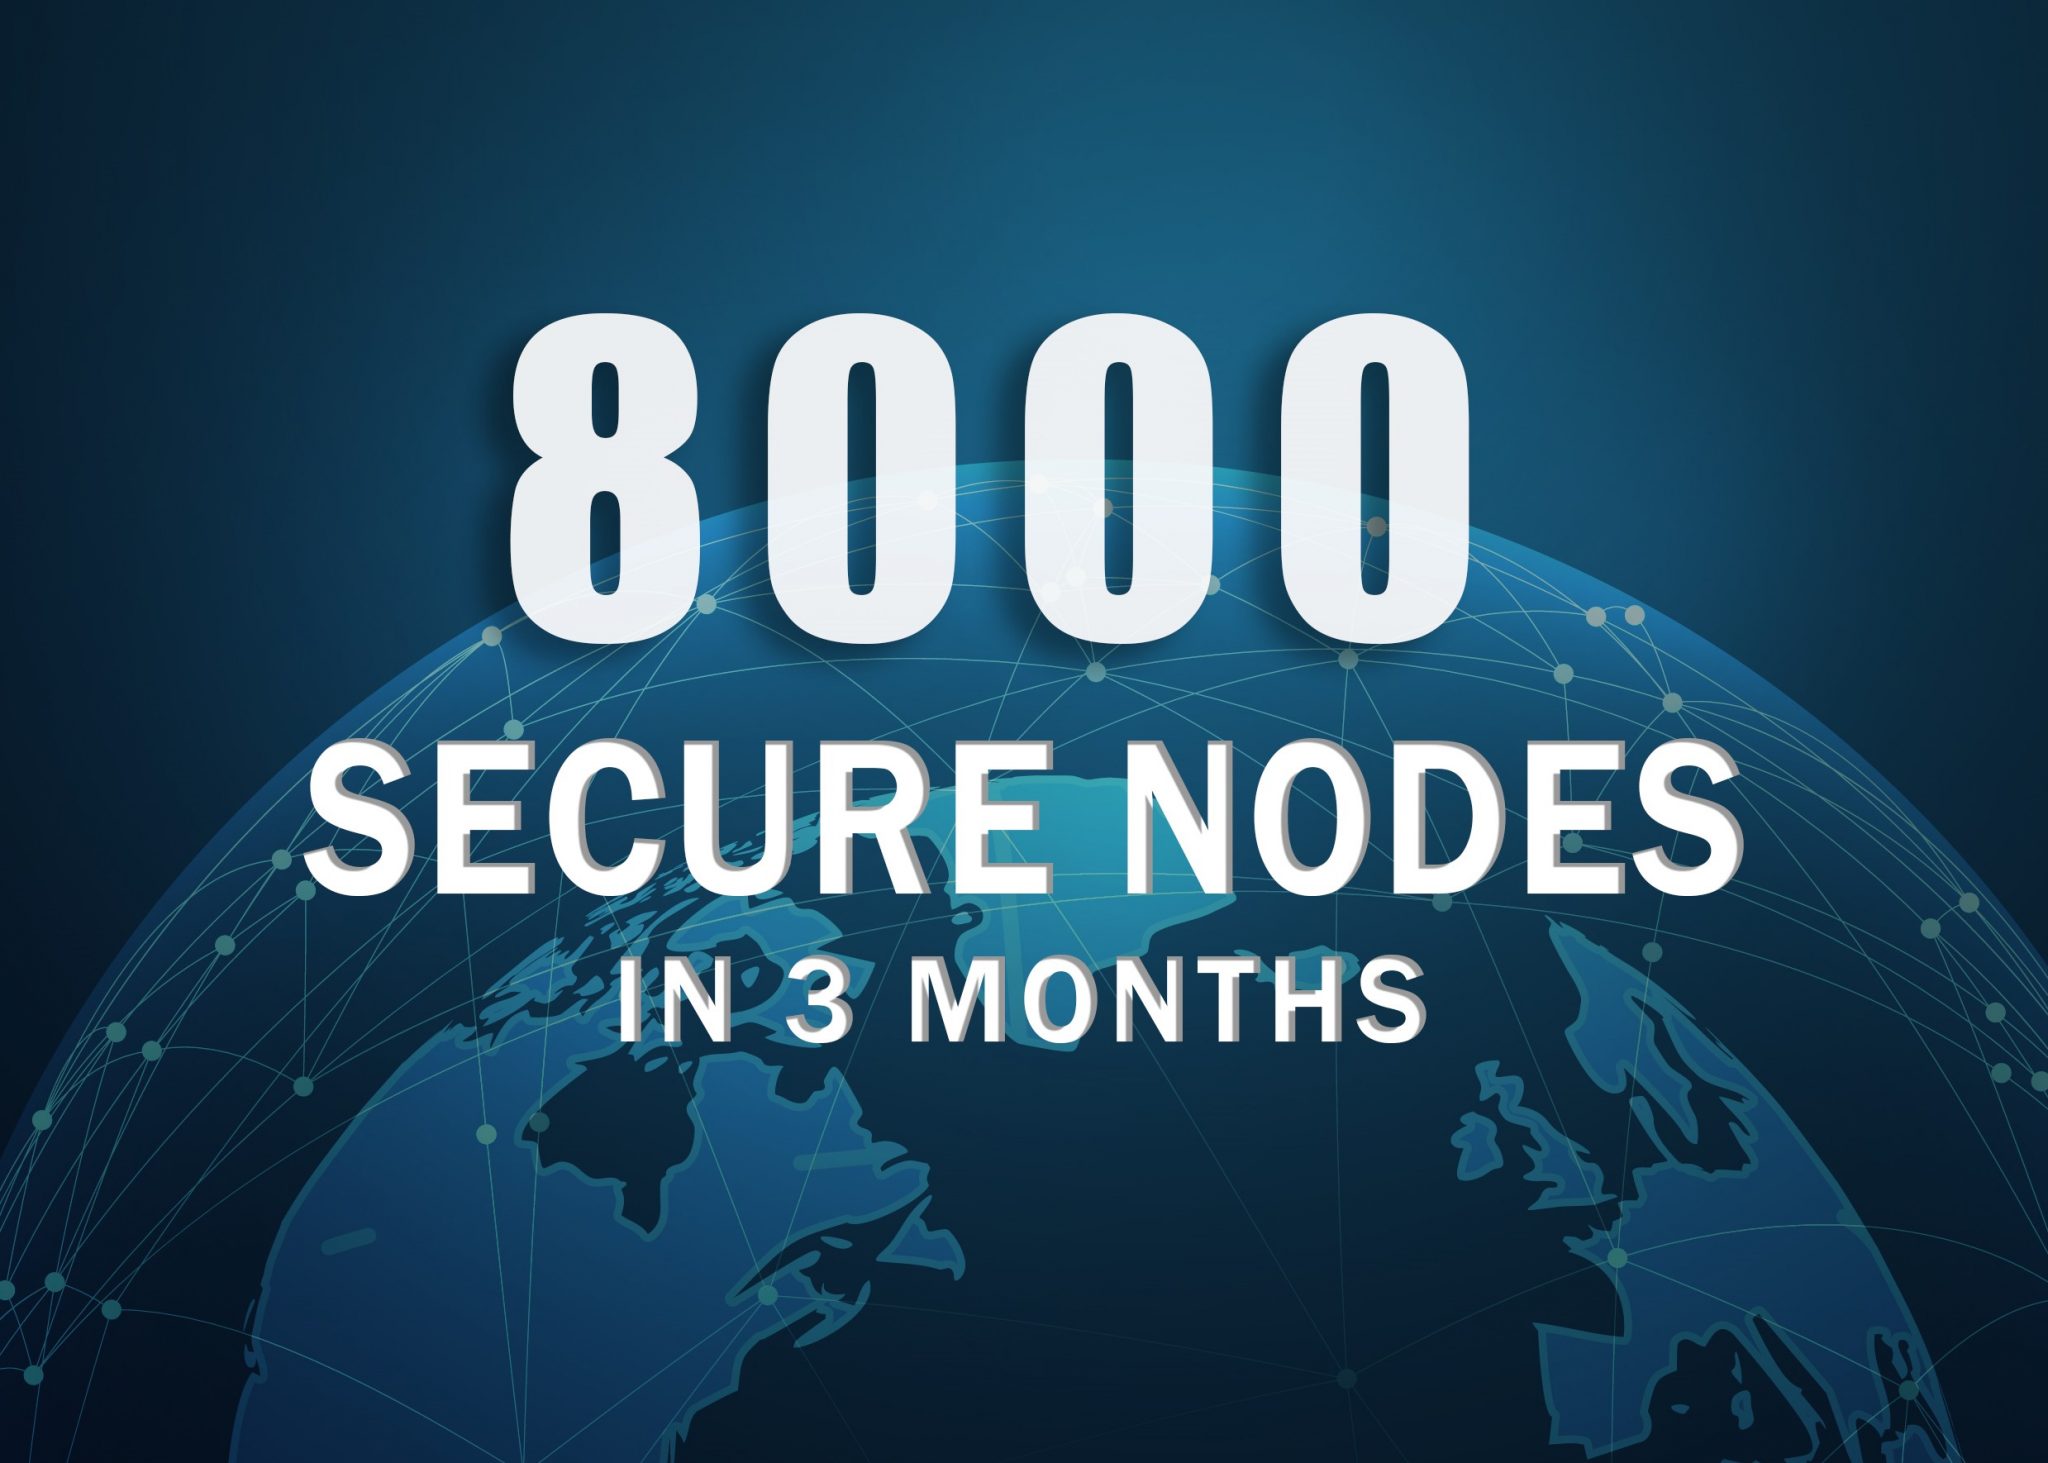 Featured image of the blog post zencash secure nodes milestone of 8000+ in 3 months